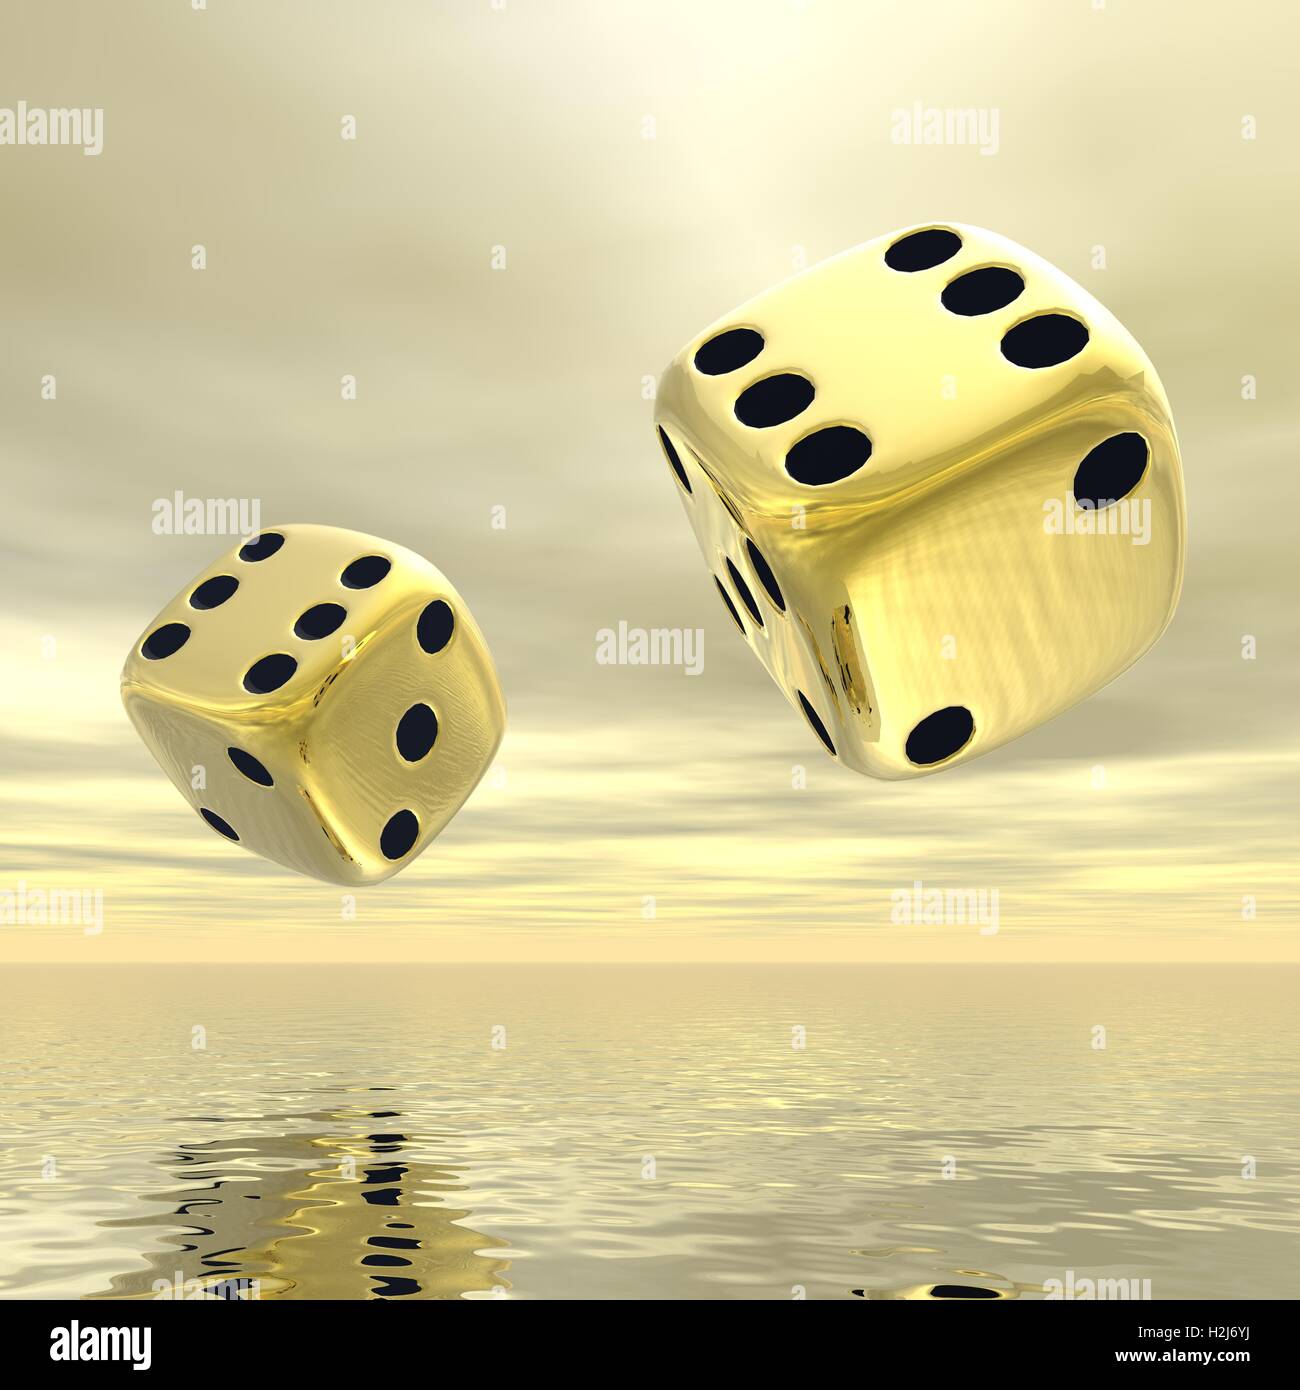 10,649 Rolling Dice Images, Stock Photos, 3D objects, & Vectors